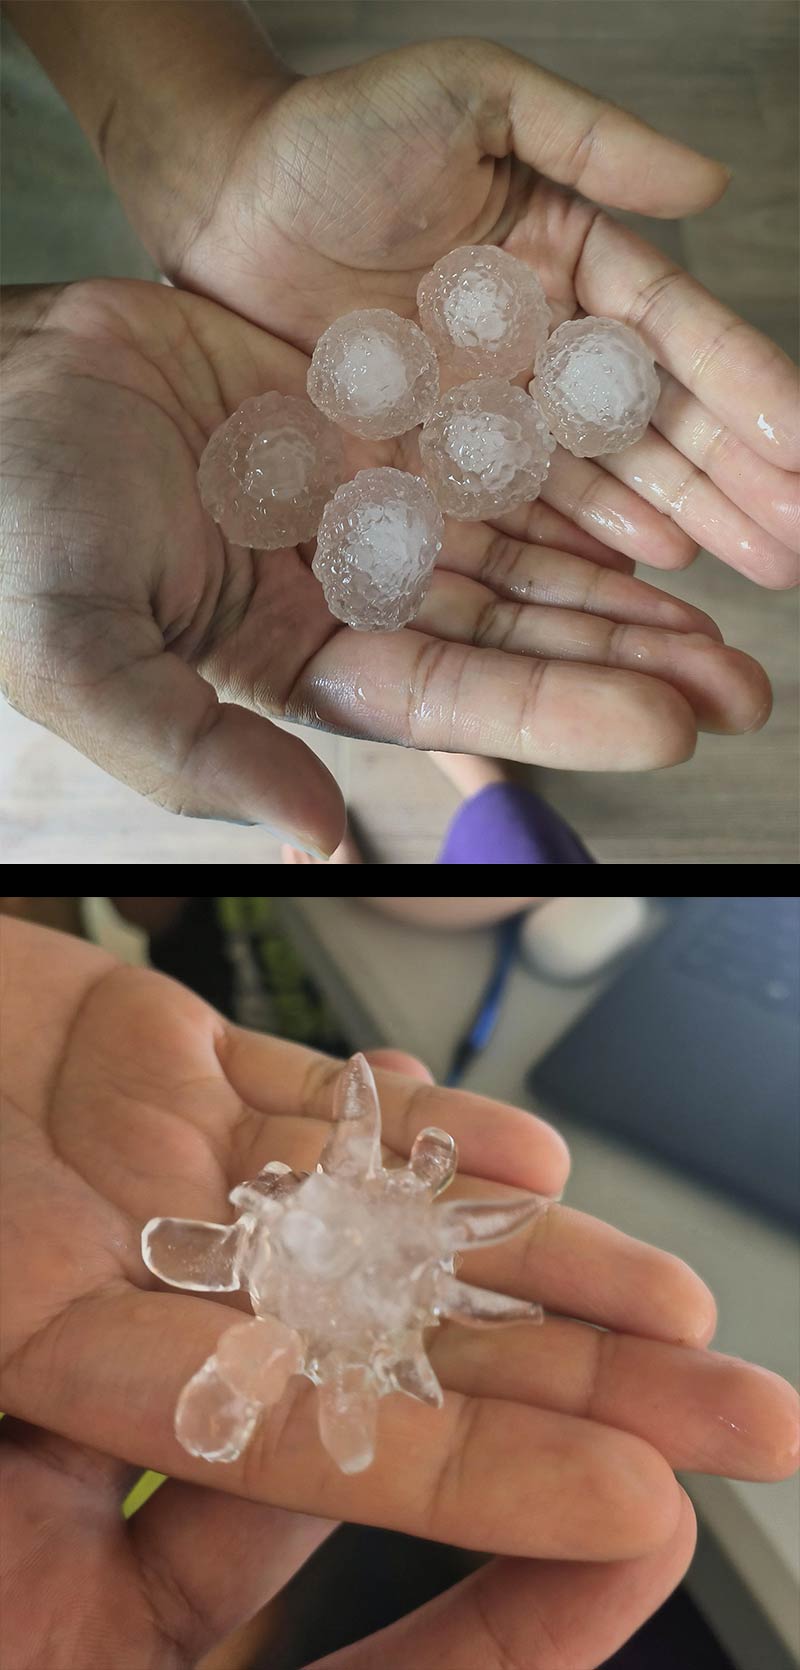 Hailstorm today in Johannesburg, South Africa. 1st wave was golf balls, 2nd wave was frozen COVID